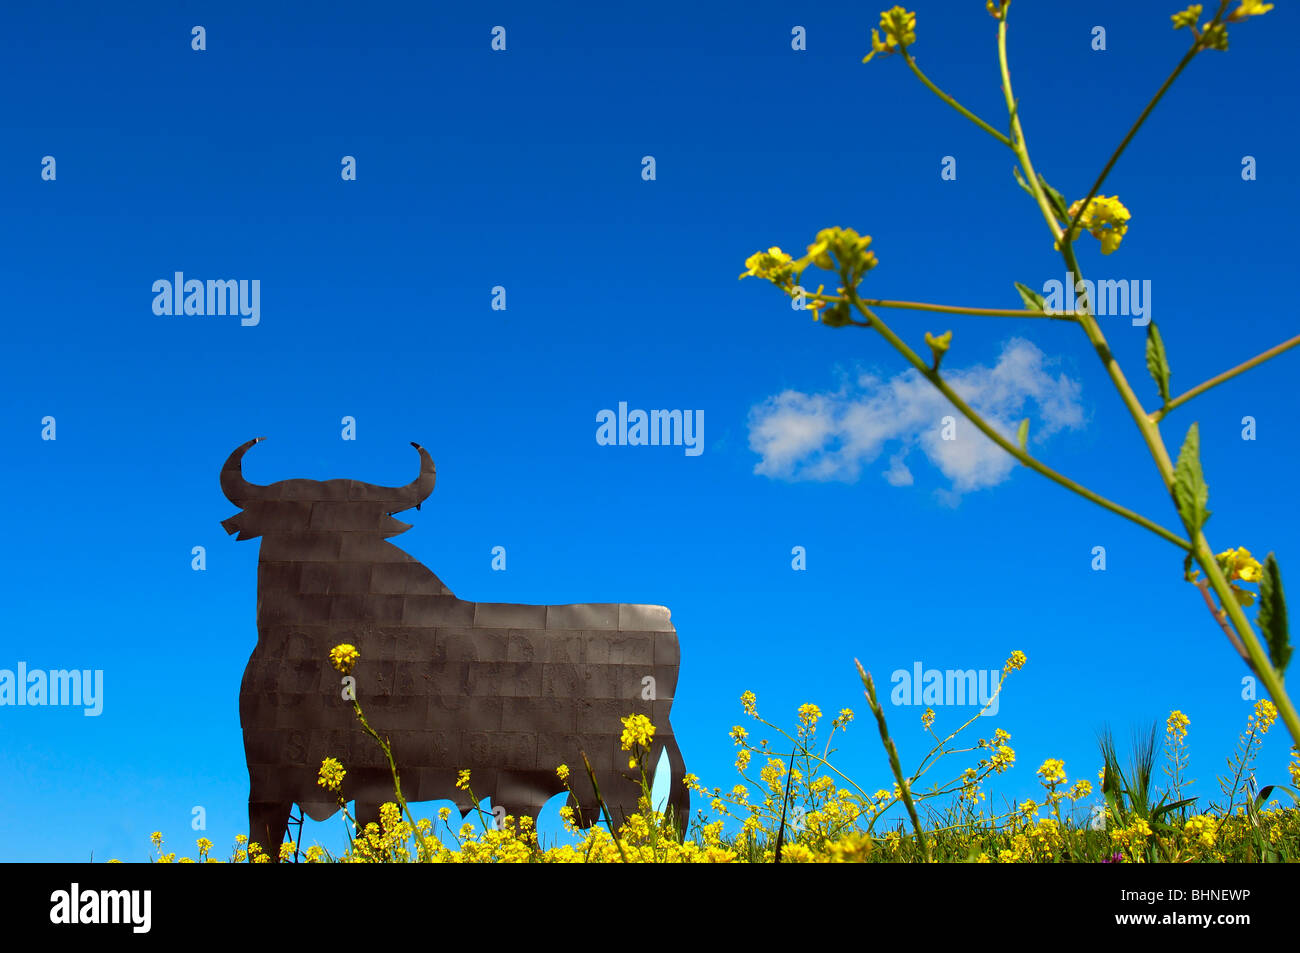 Bull silhouette, typical advertising of Spanish sherry Osborne. Malaga. Andalusia, Spain Stock Photo